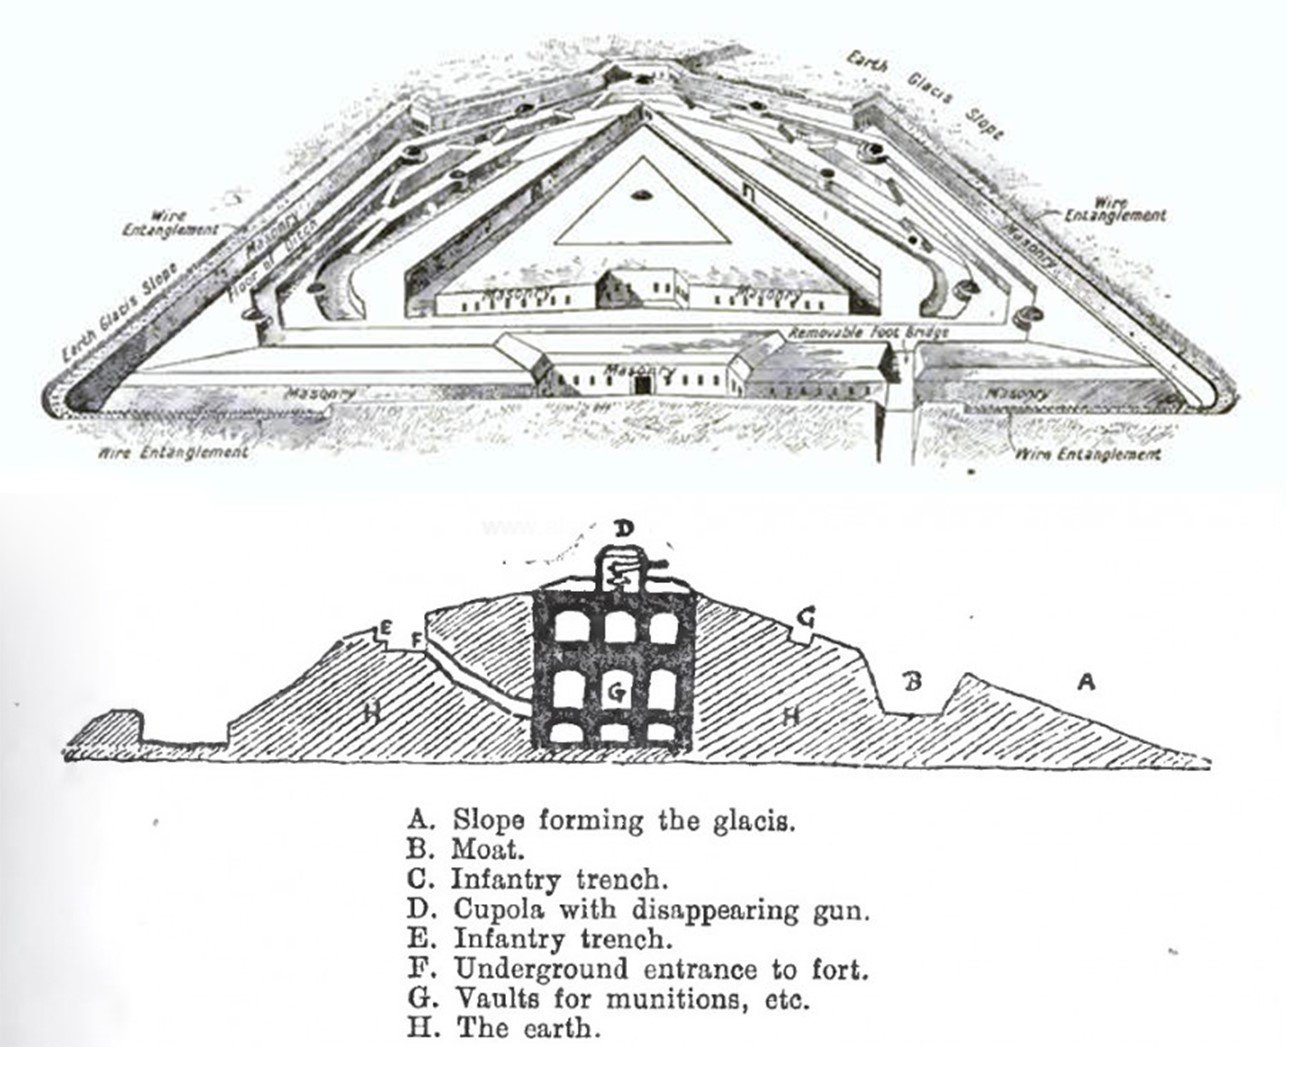 Brialmont's fort